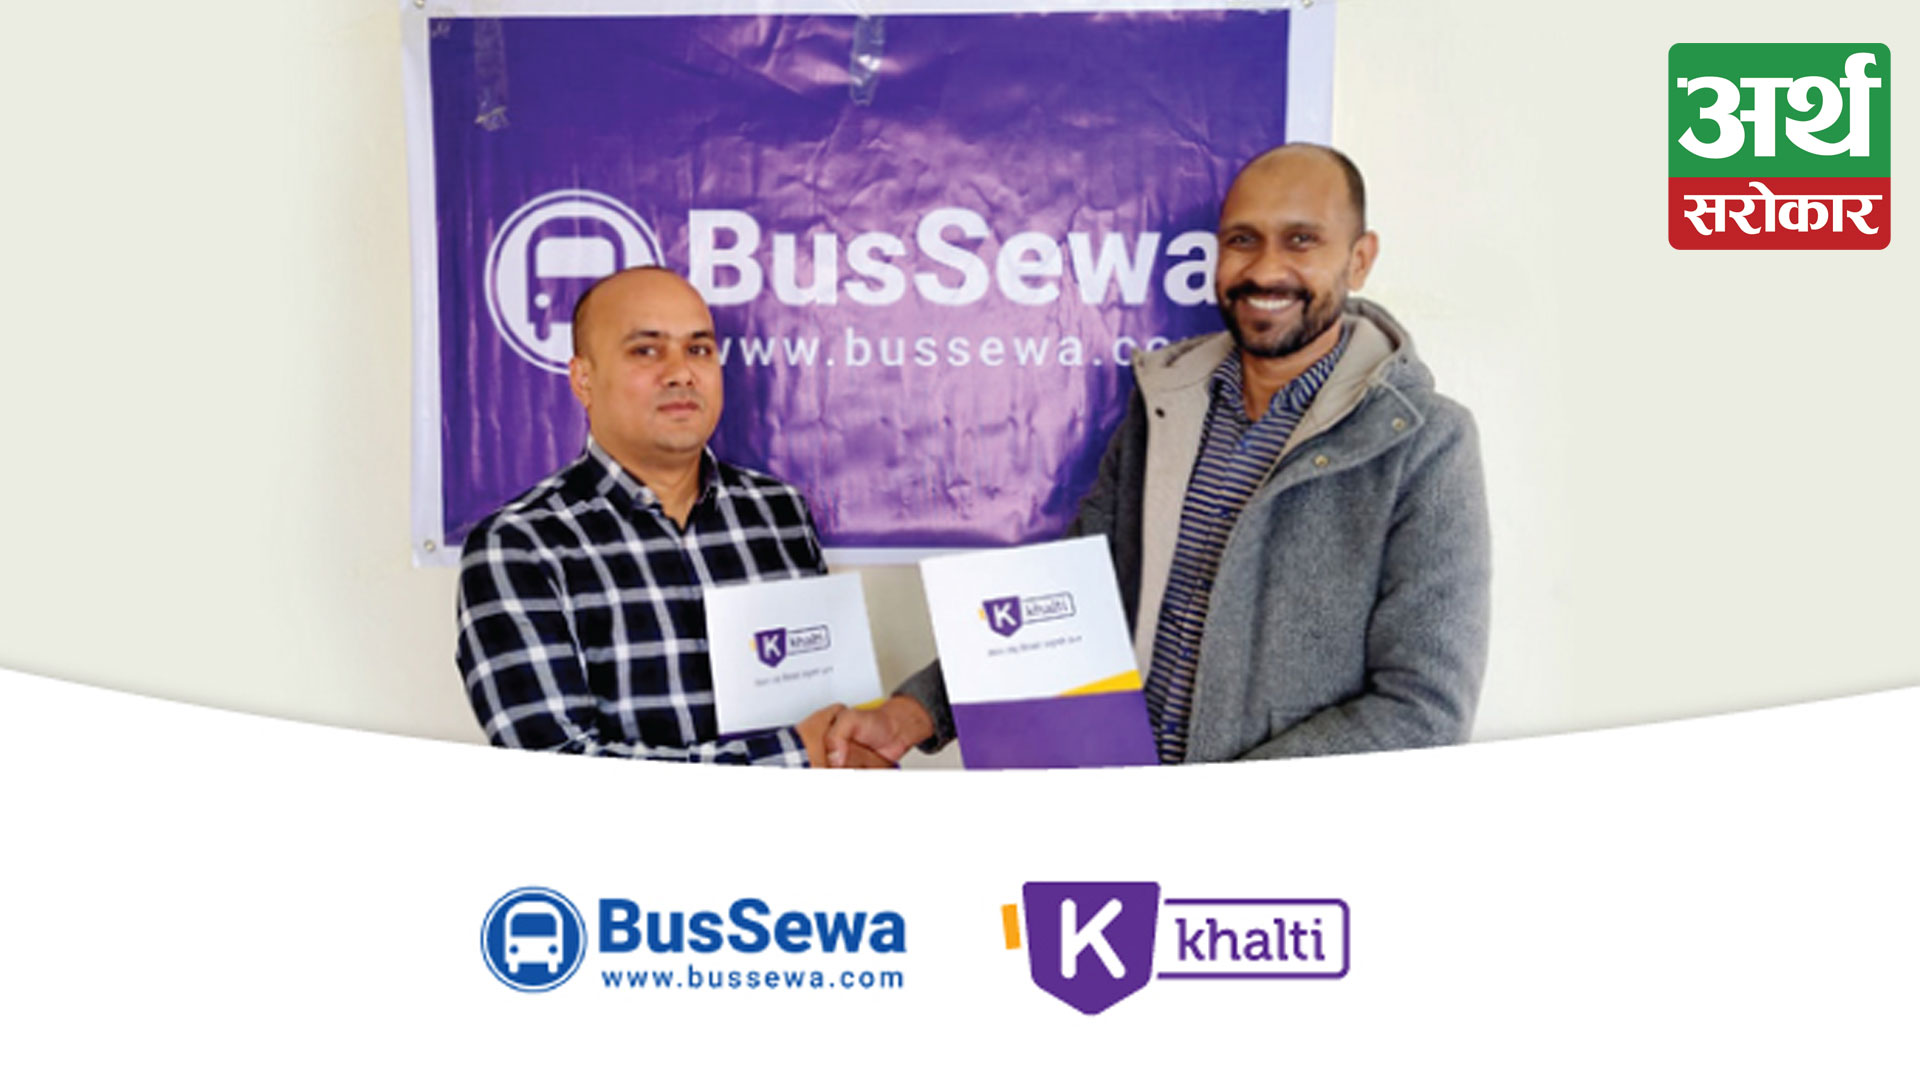 Buy Bus Tickets from Khalti – Win a smartphone